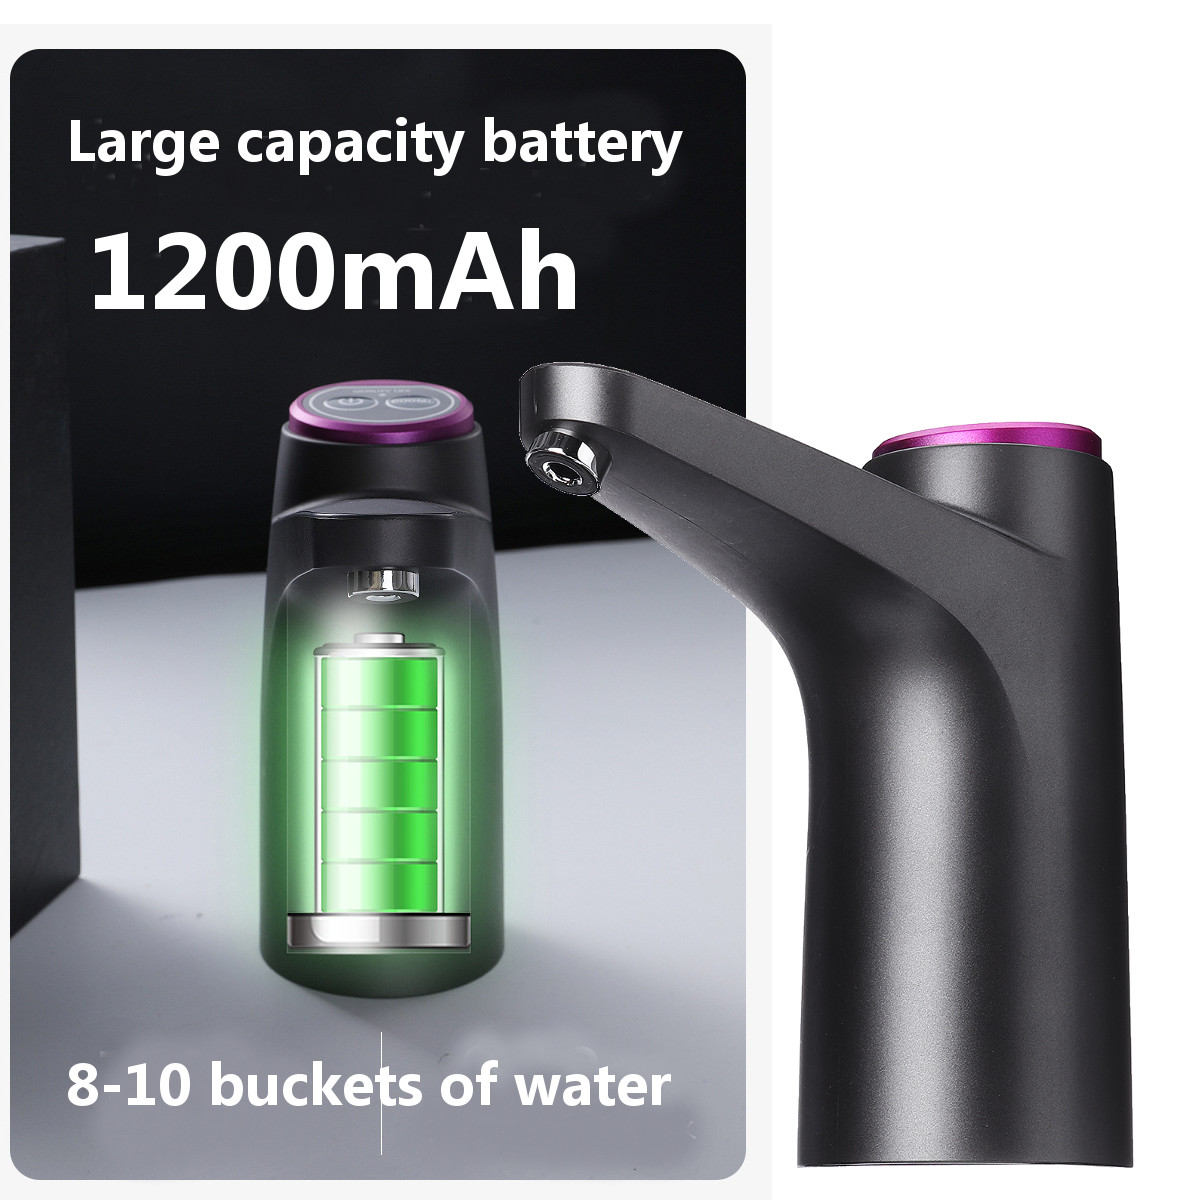 Portable-USB-Wireless-Electric-Water-Pump-Drinking-Bottle-Dispenser-Touch-Control-1670497-4